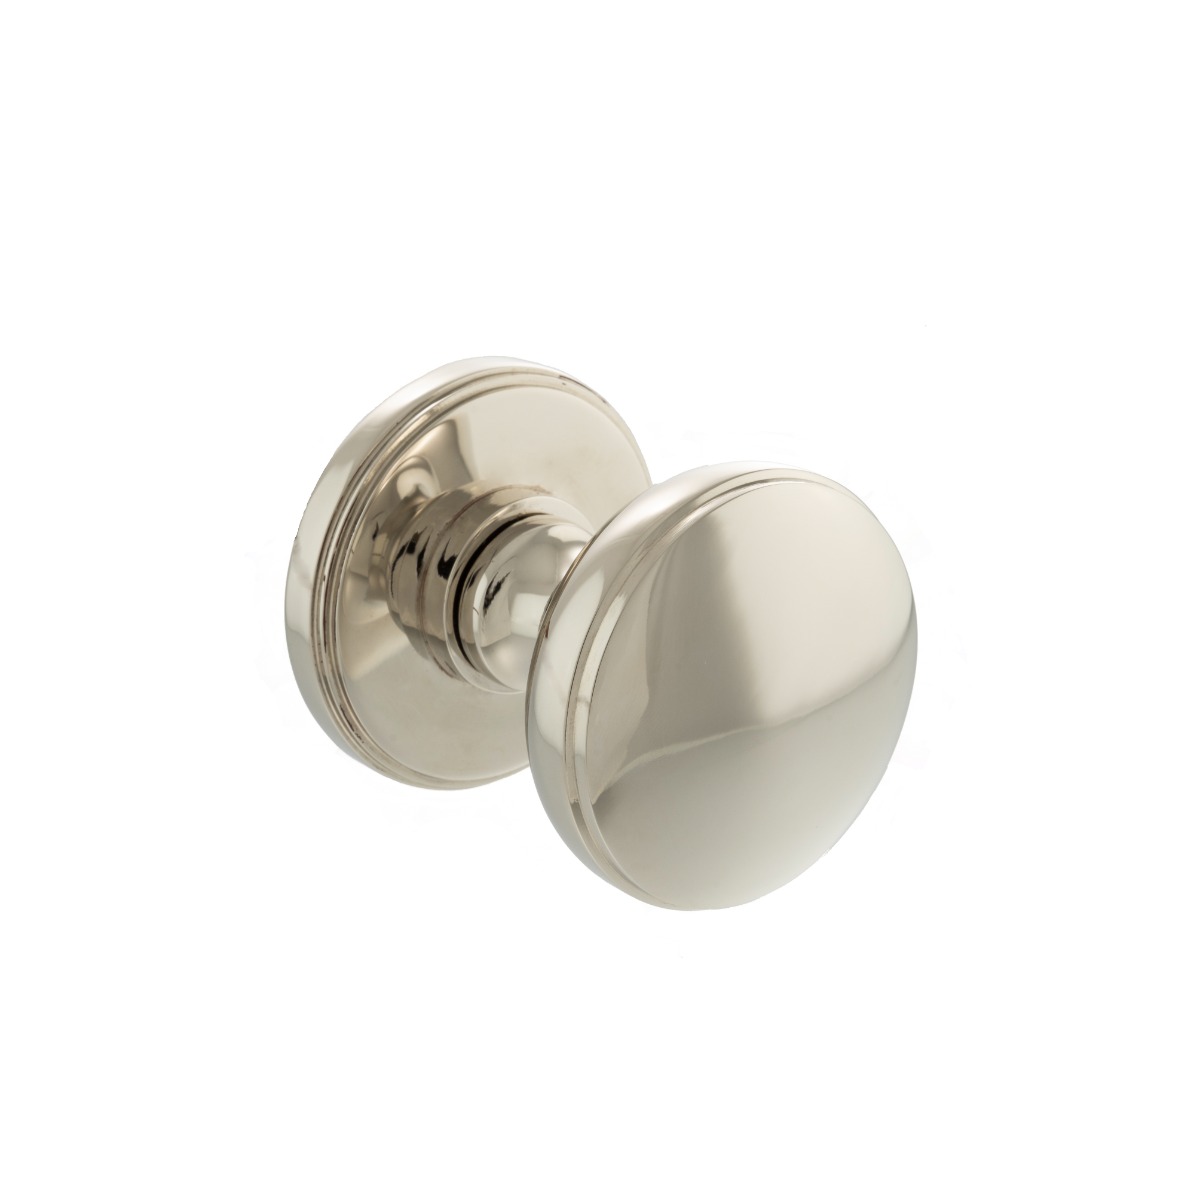 Millhouse Brass Edison Solid Brass Domed Mortice Knob on Concealed Fix Rose - Polished Nickel MH400DMKPN